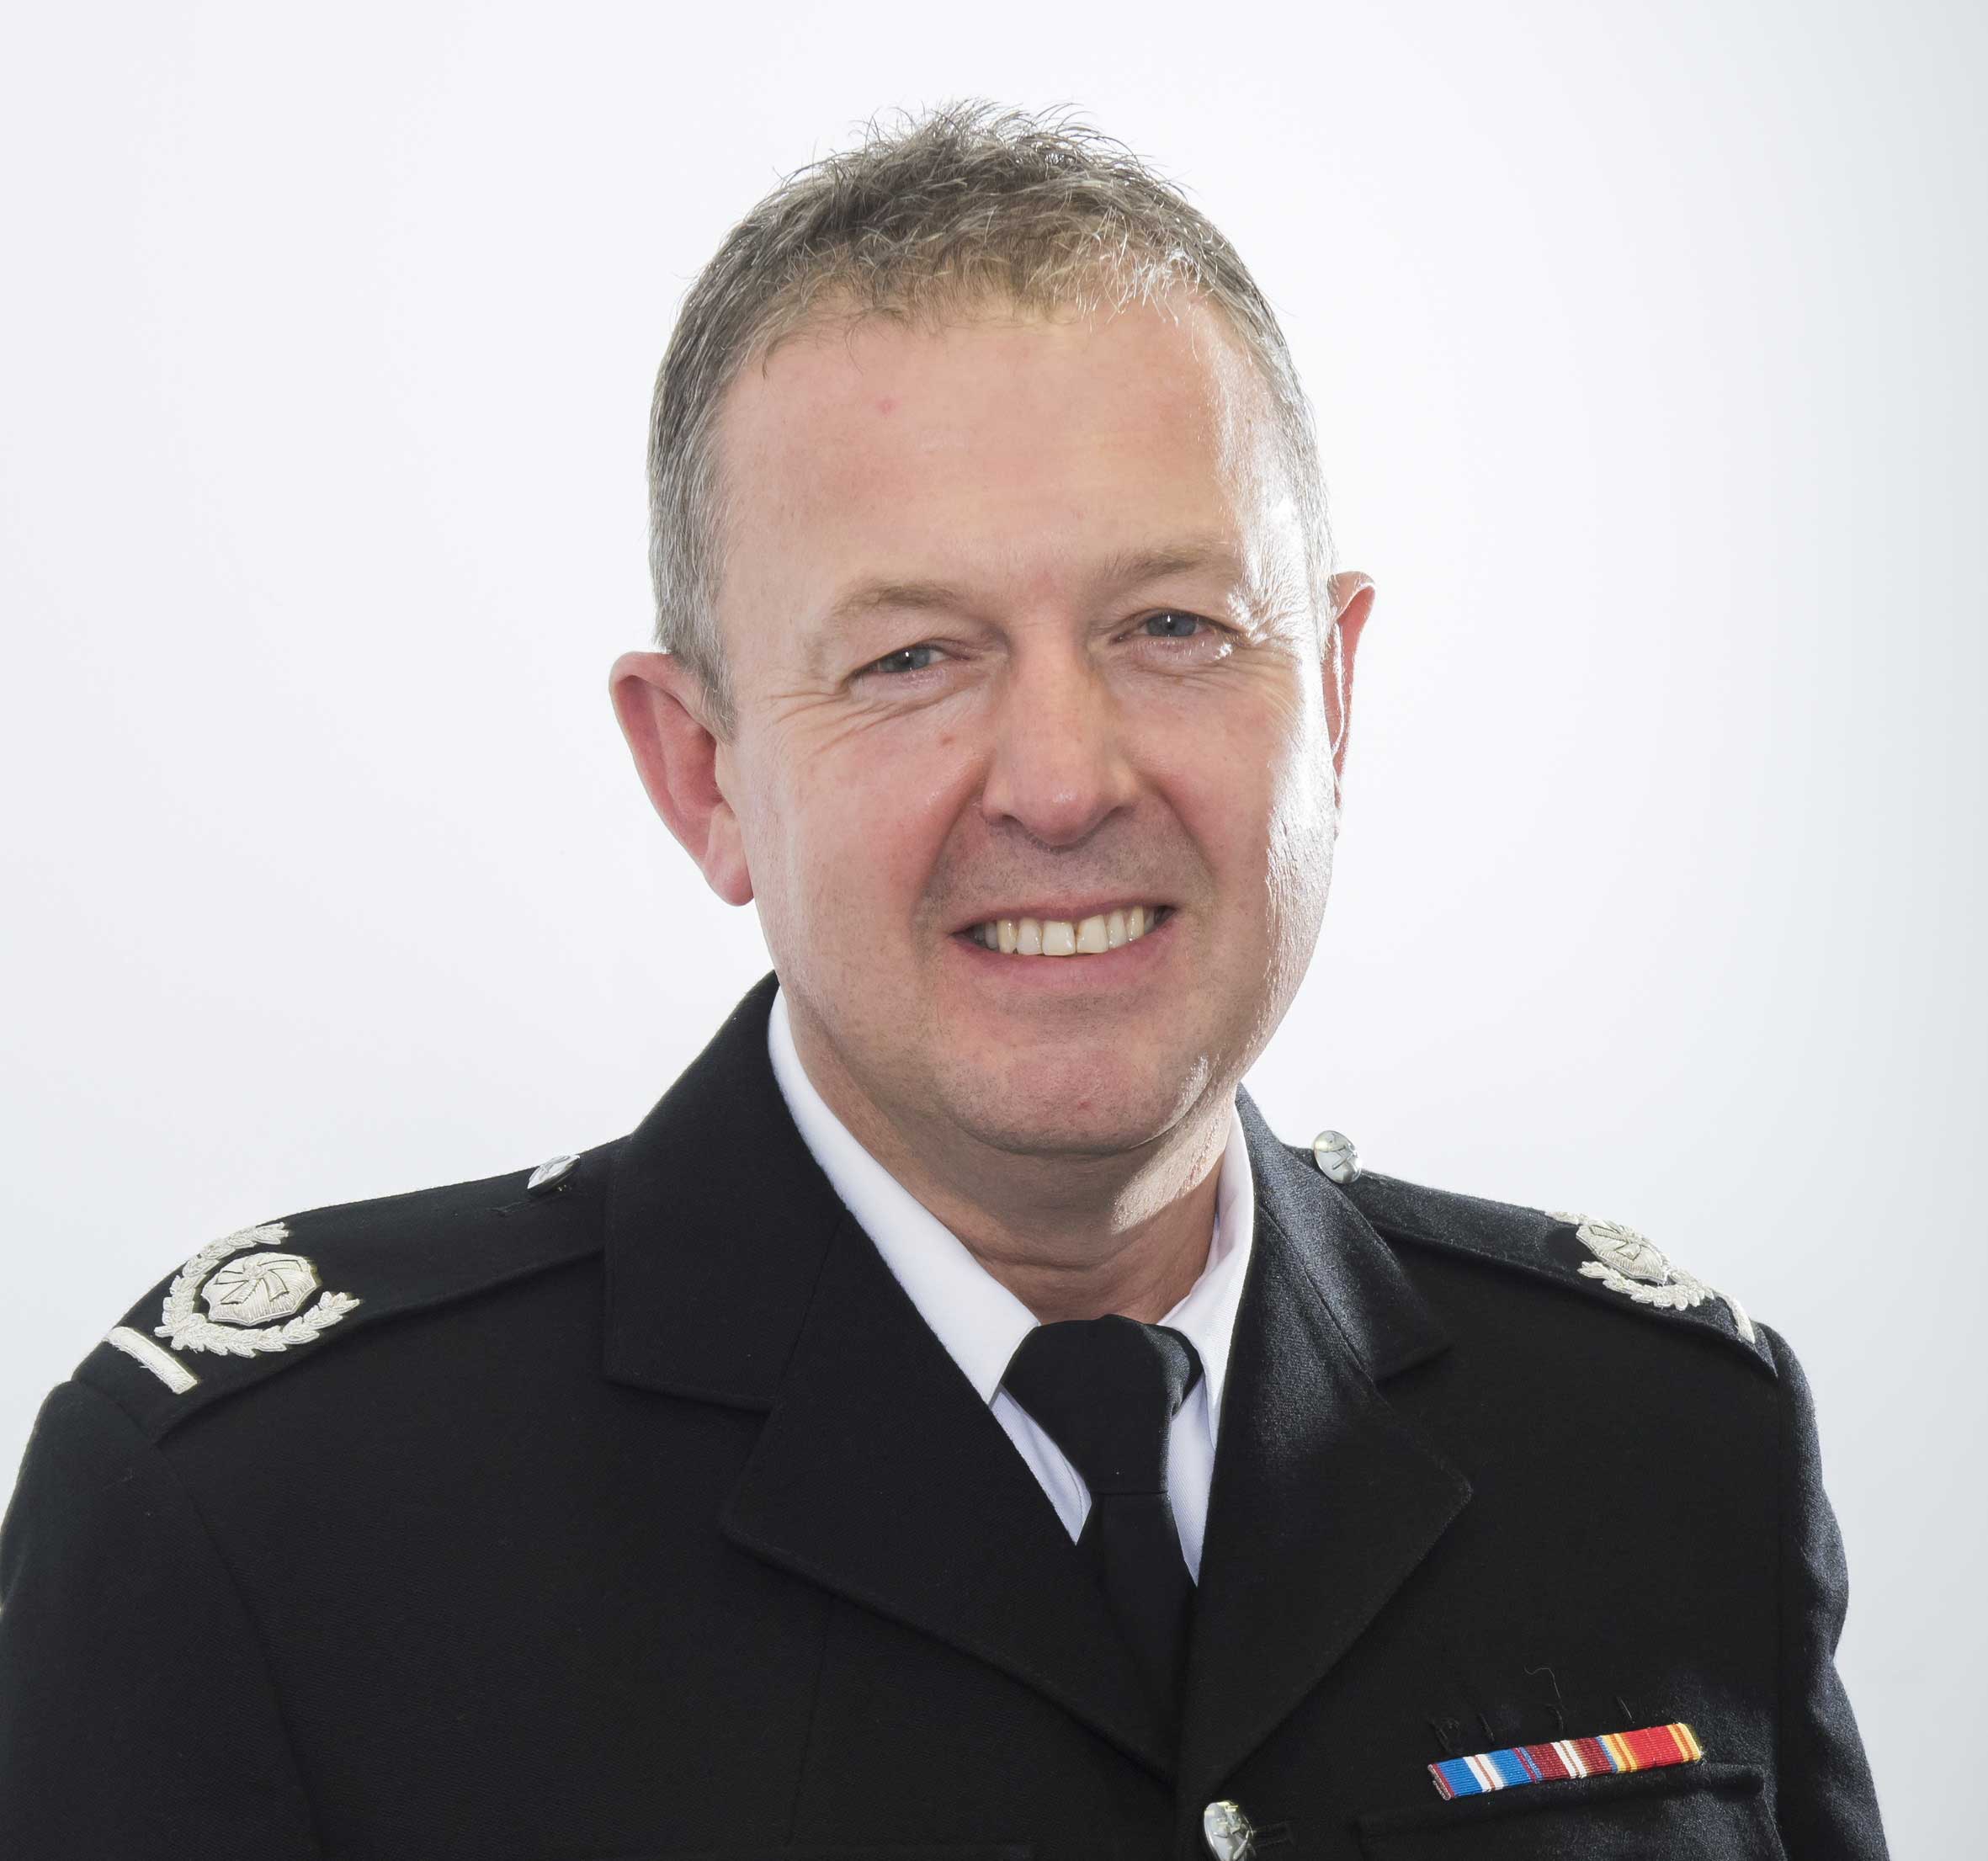 Jon Foster as the new Deputy Chief Fire Officer of North Yorkshire Fire and Rescue Service.